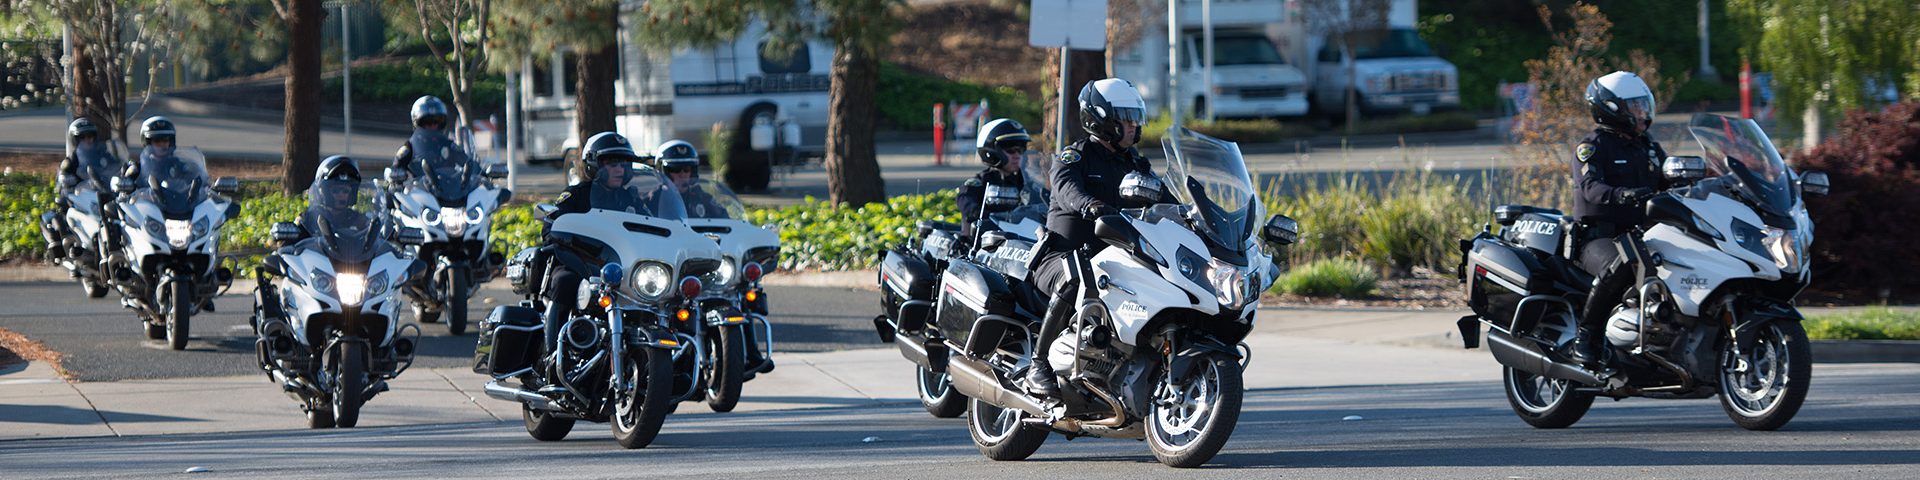 Fremont Police Department Motorcycles